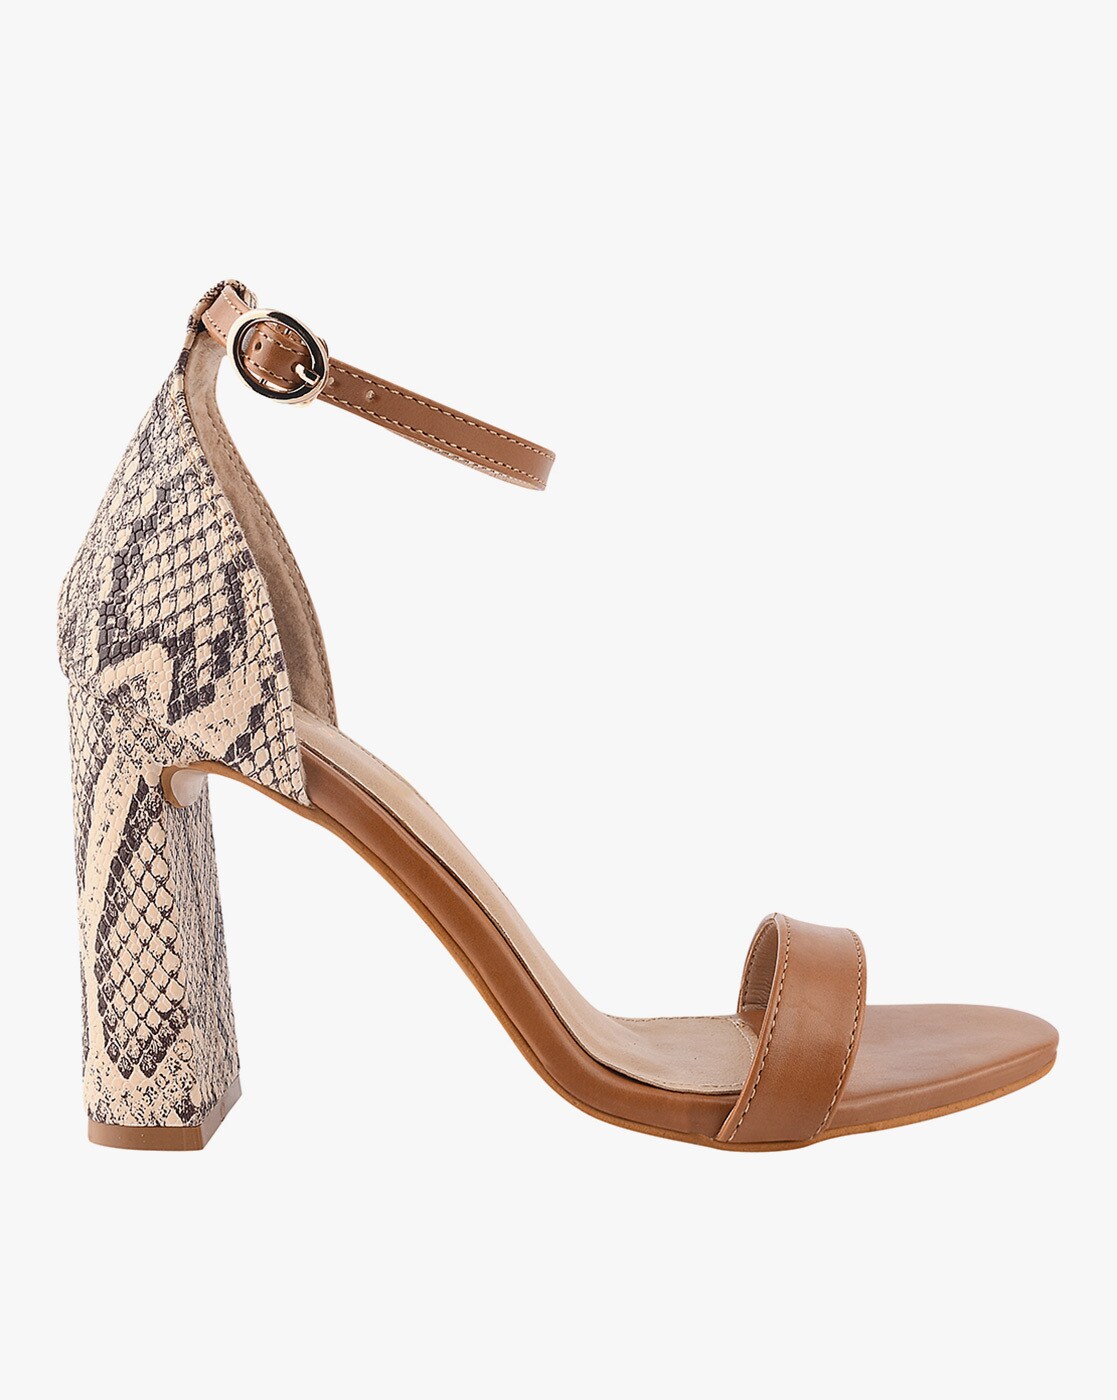 Camel Meadow Strappy Block Heel Sandals - CHARLES & KEITH IN